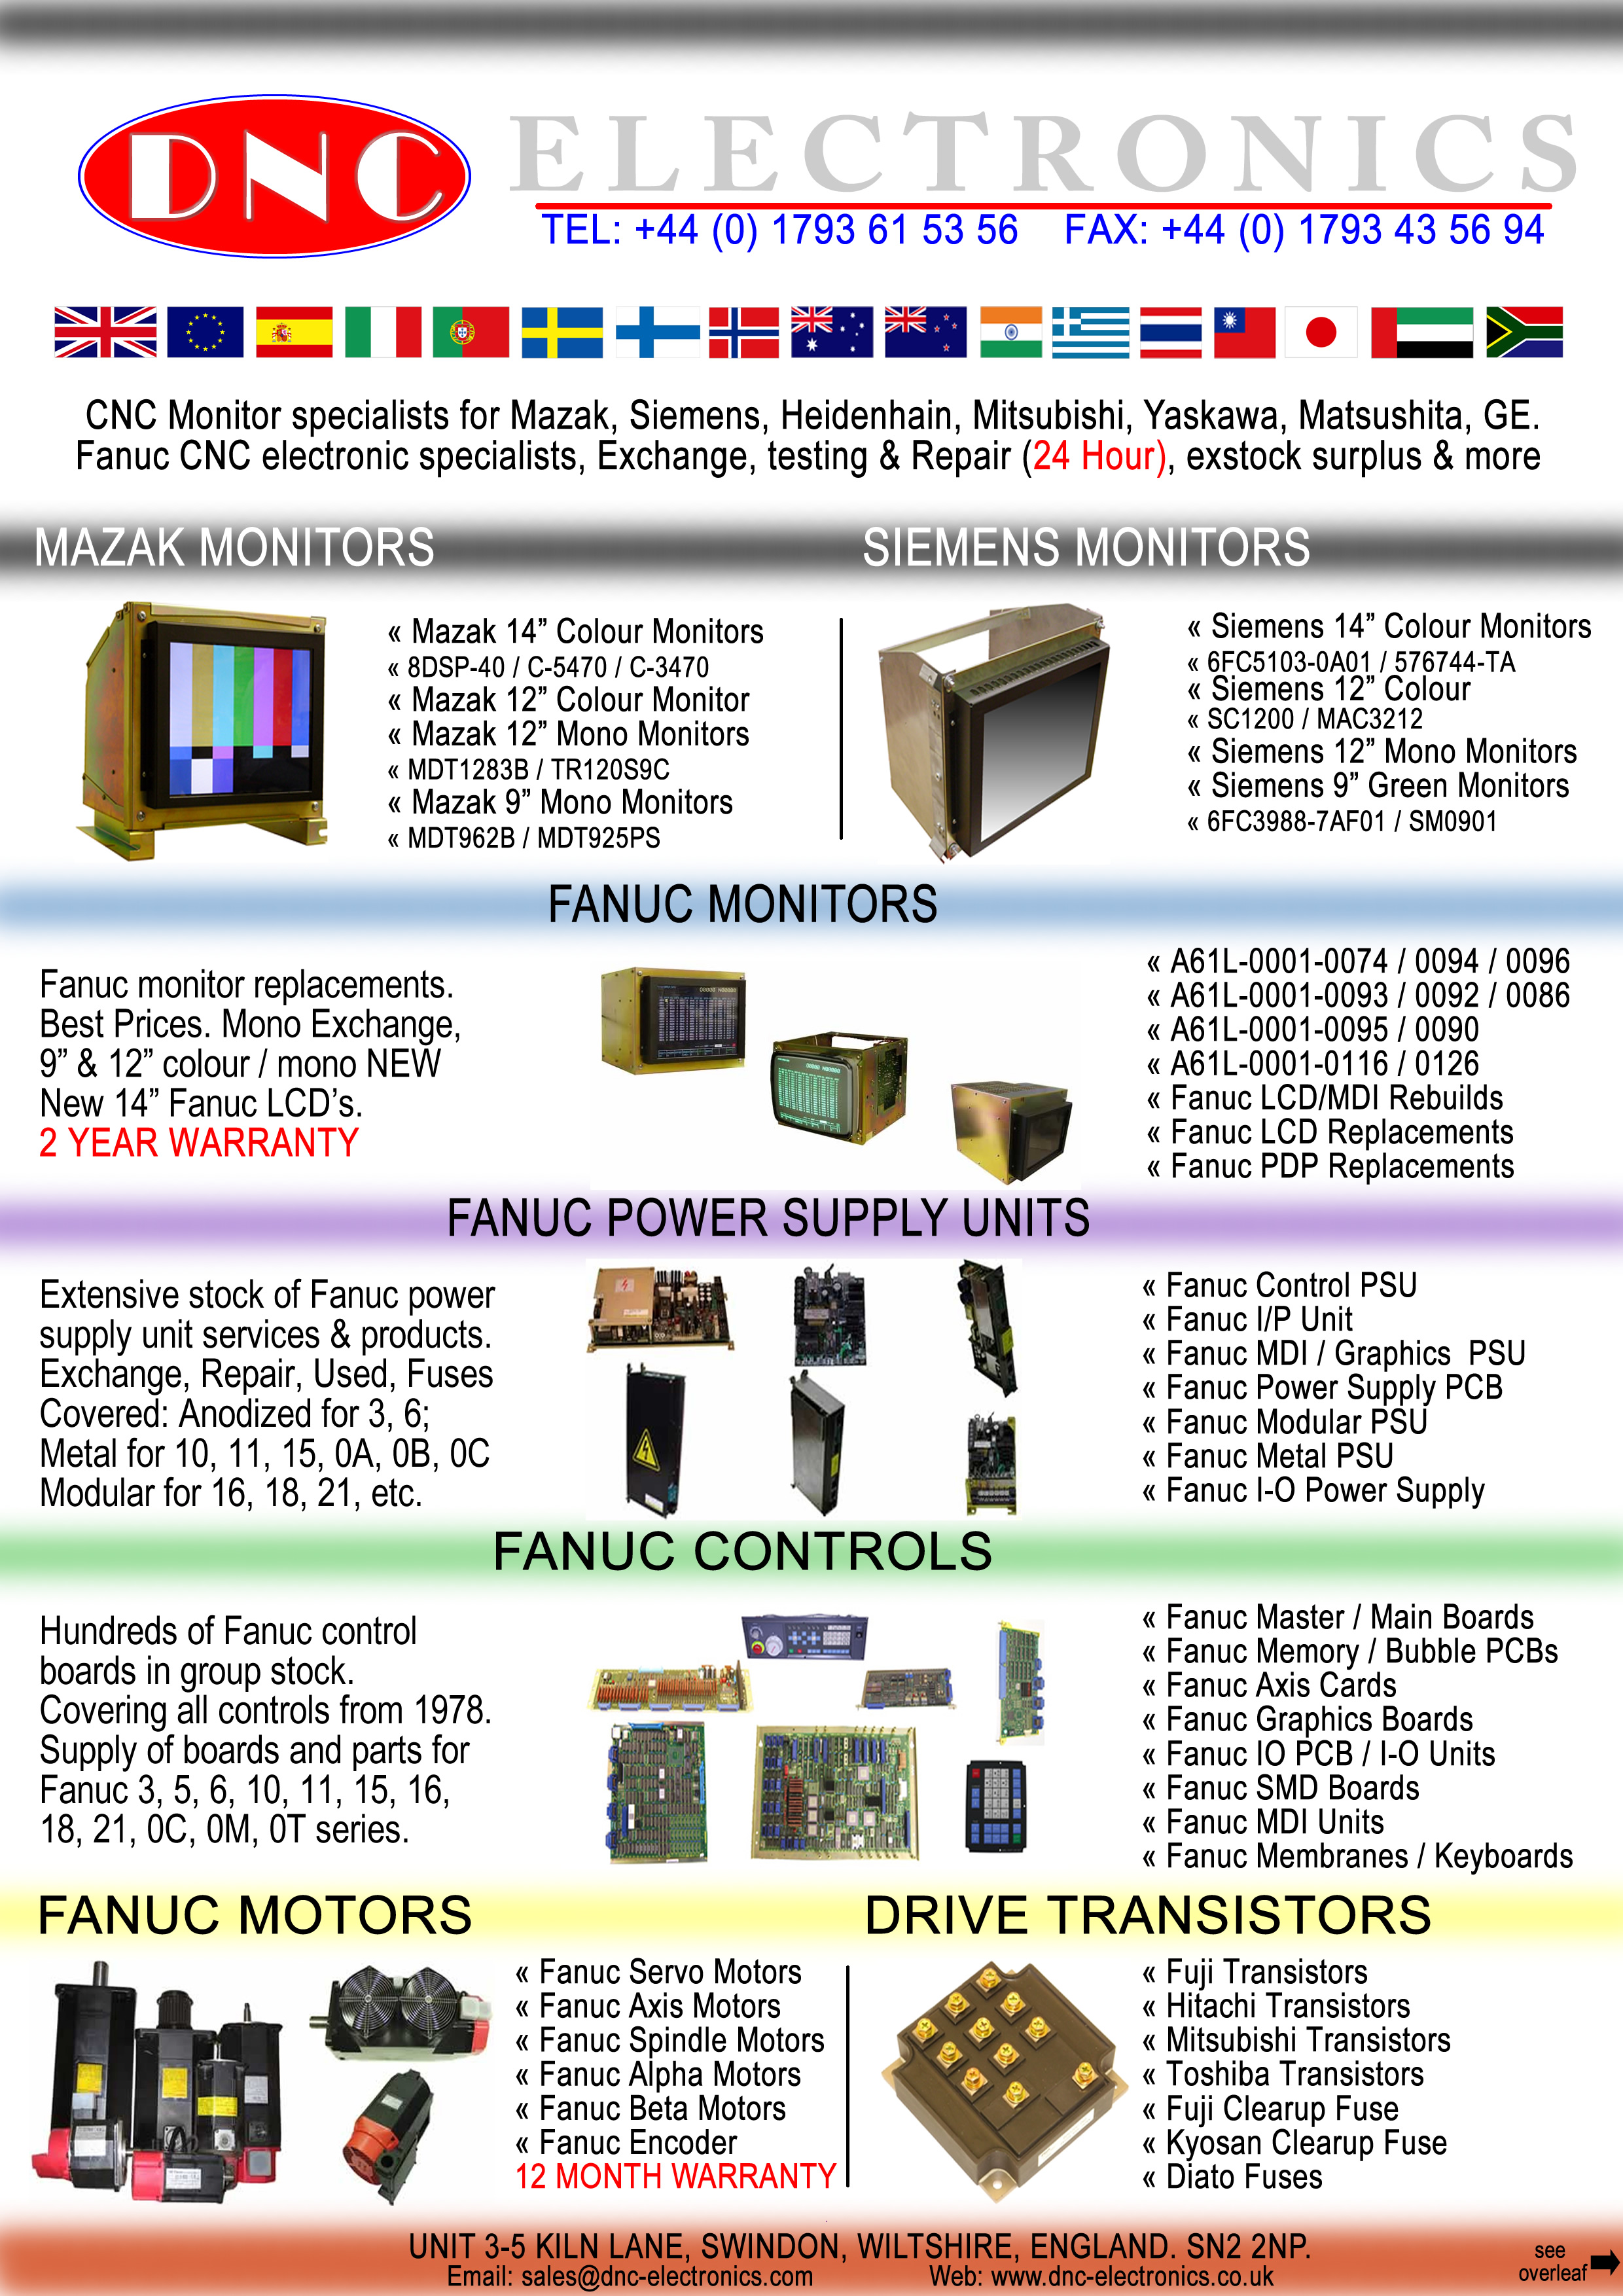 CNC Electronic Specialists